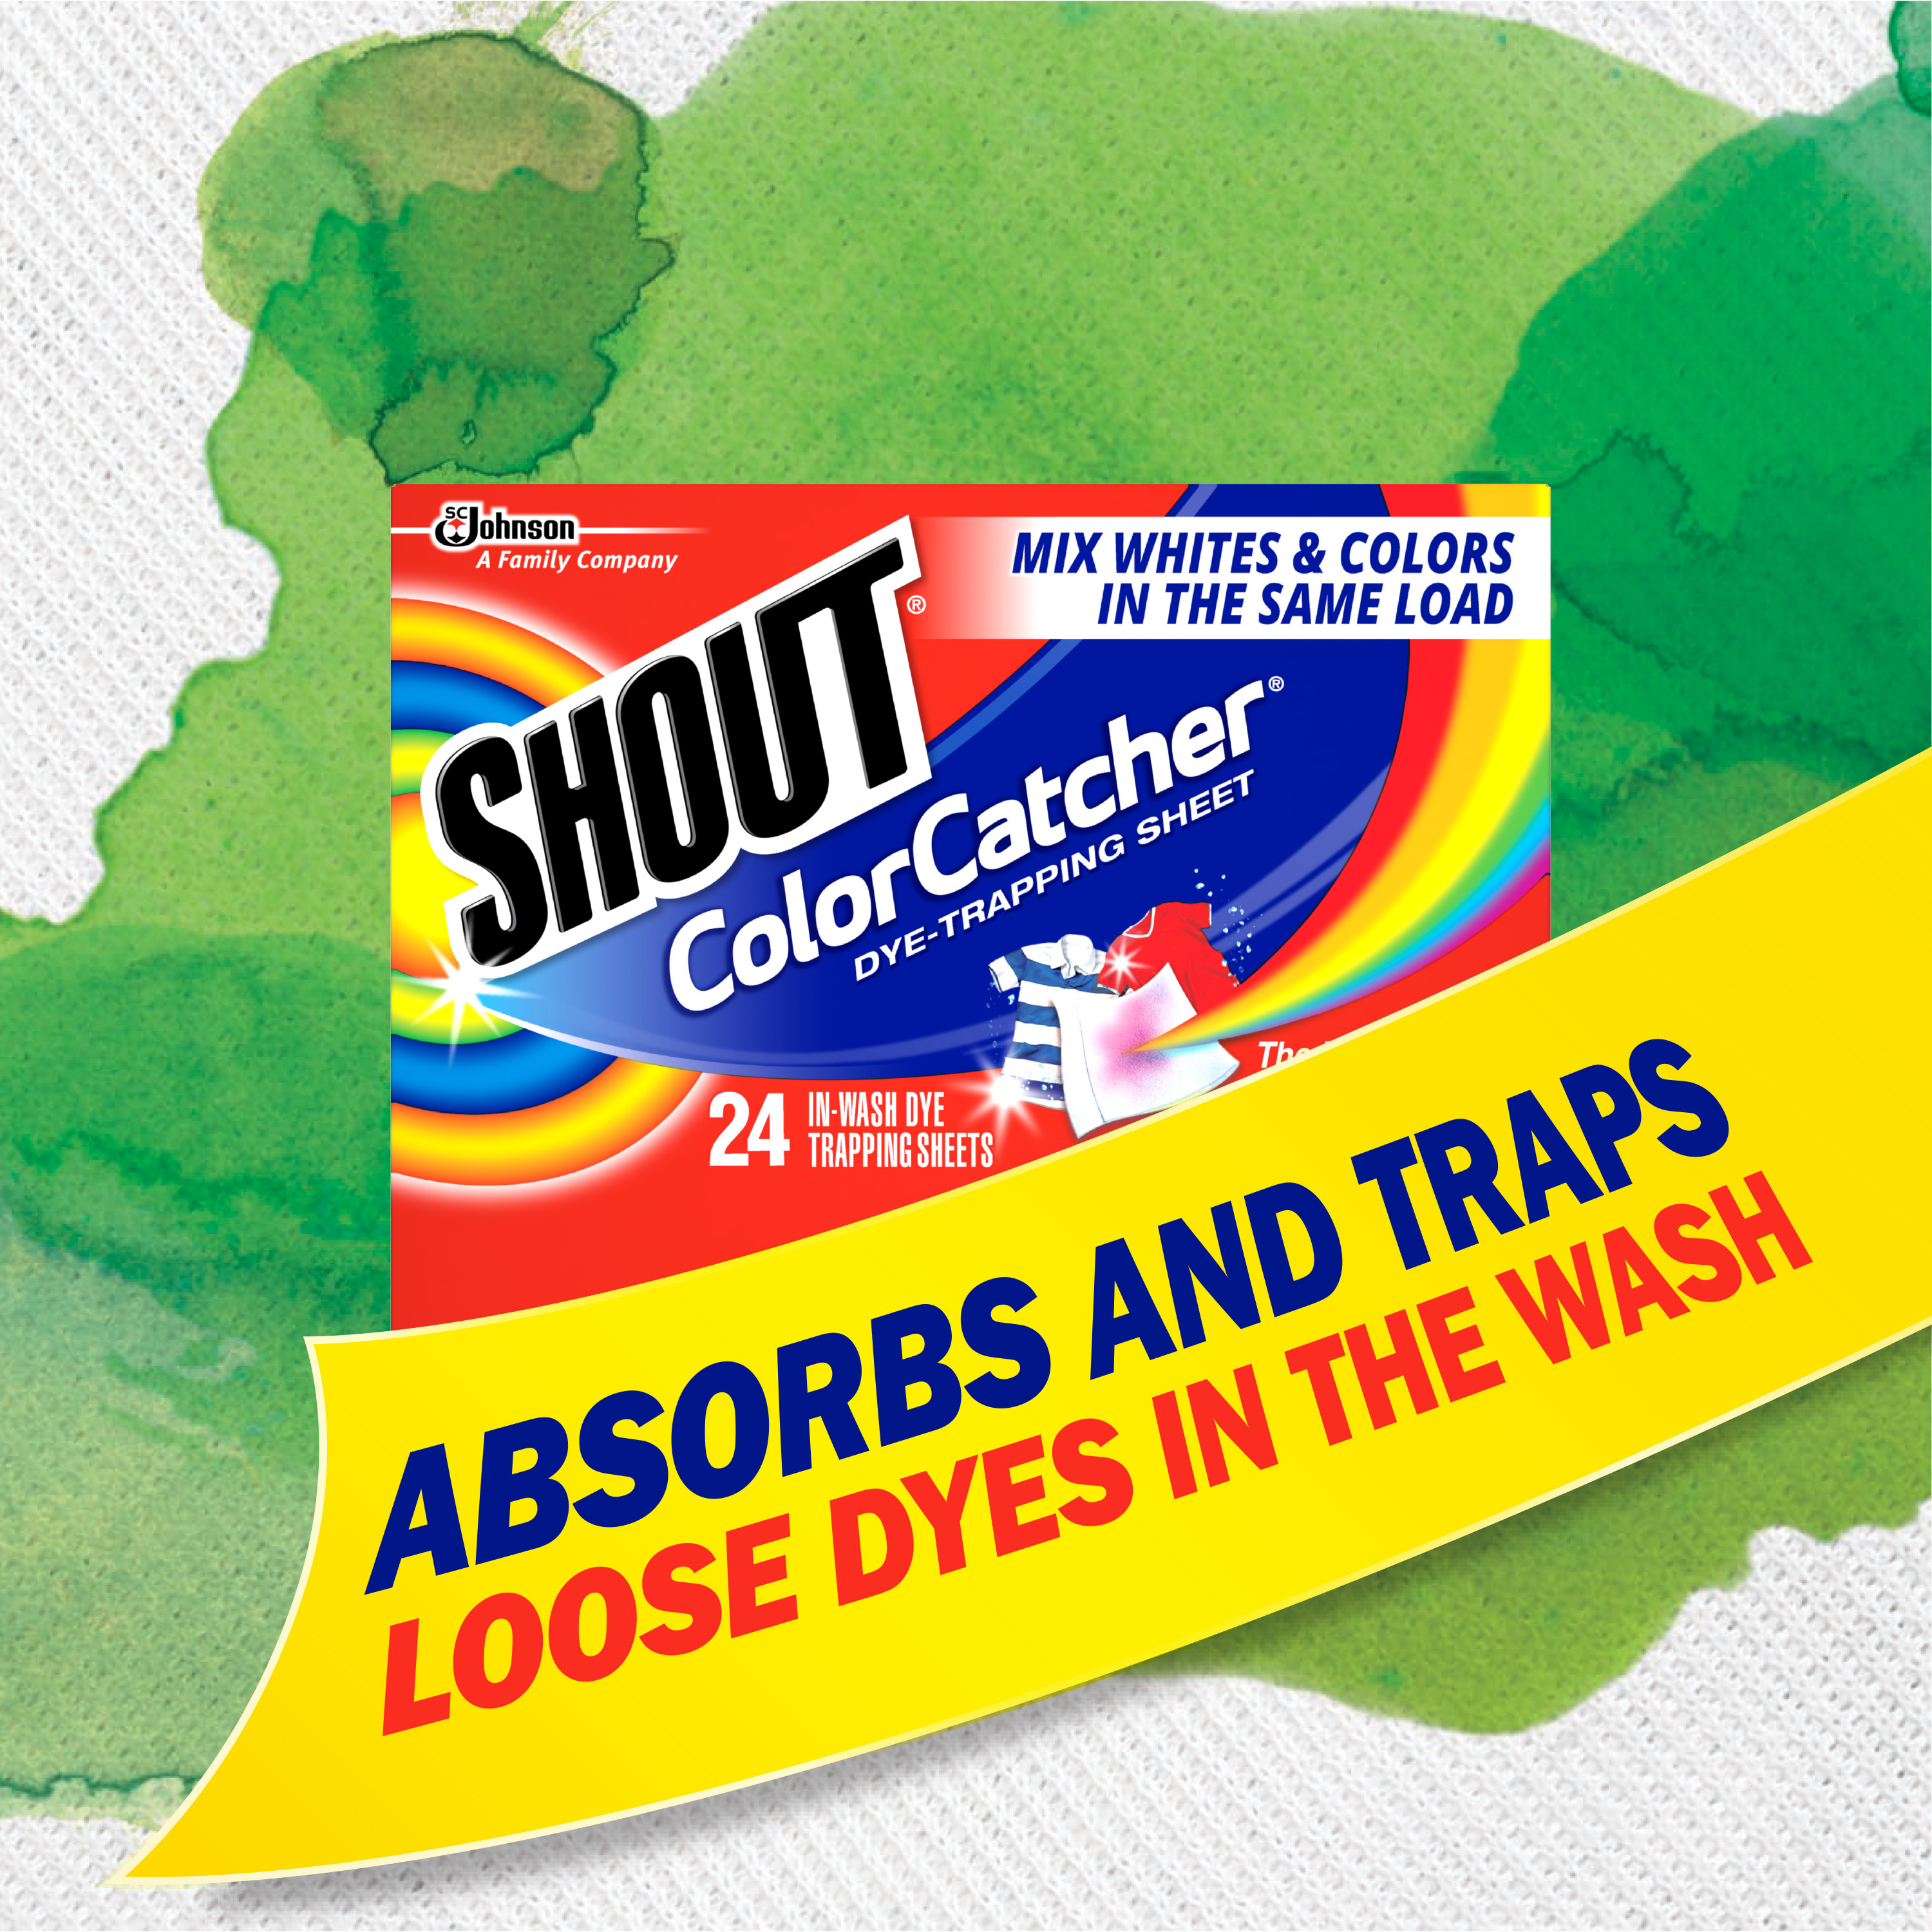 Shout Color Catcher,&nbsp;Laundry&nbsp;Dye-Trapping Sheets, 24 Sheets - image 5 of 13